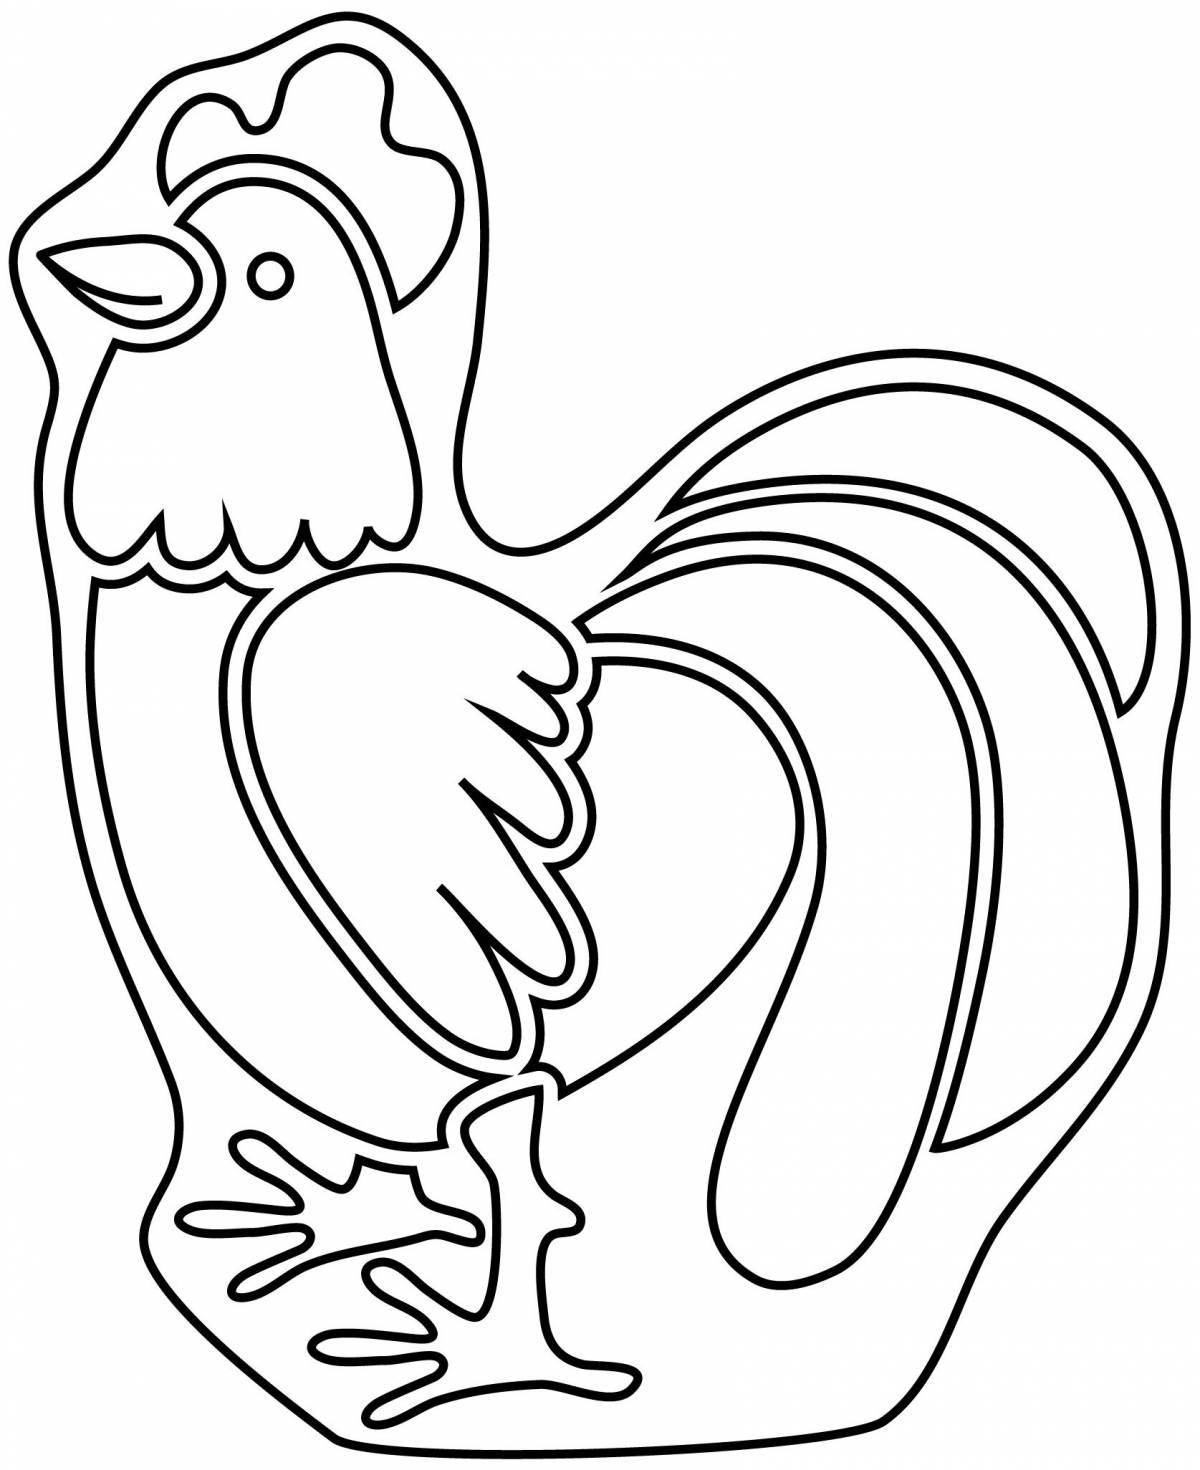 Coloring book cute cockerel for kids 2-3 years old